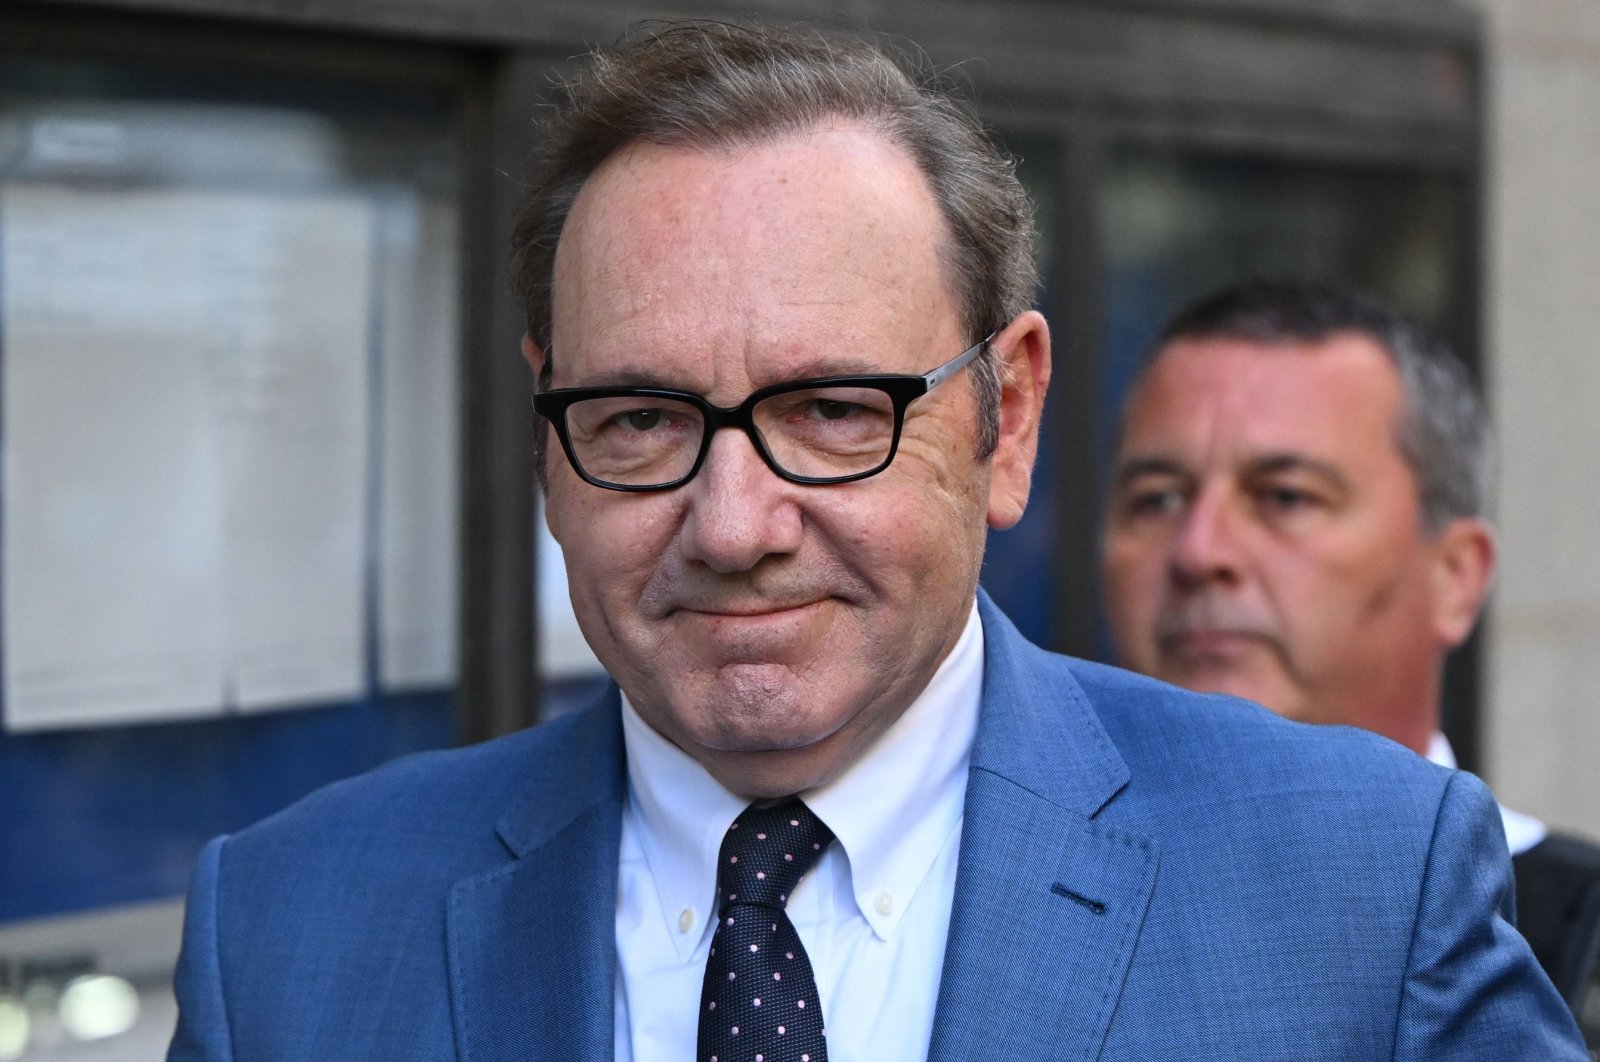 U.S. actor Kevin Spacey arrives at the Old Bailey to appear in court over four counts of sexual assault, London, U.K., July 14, 2022. (AFP Photo)